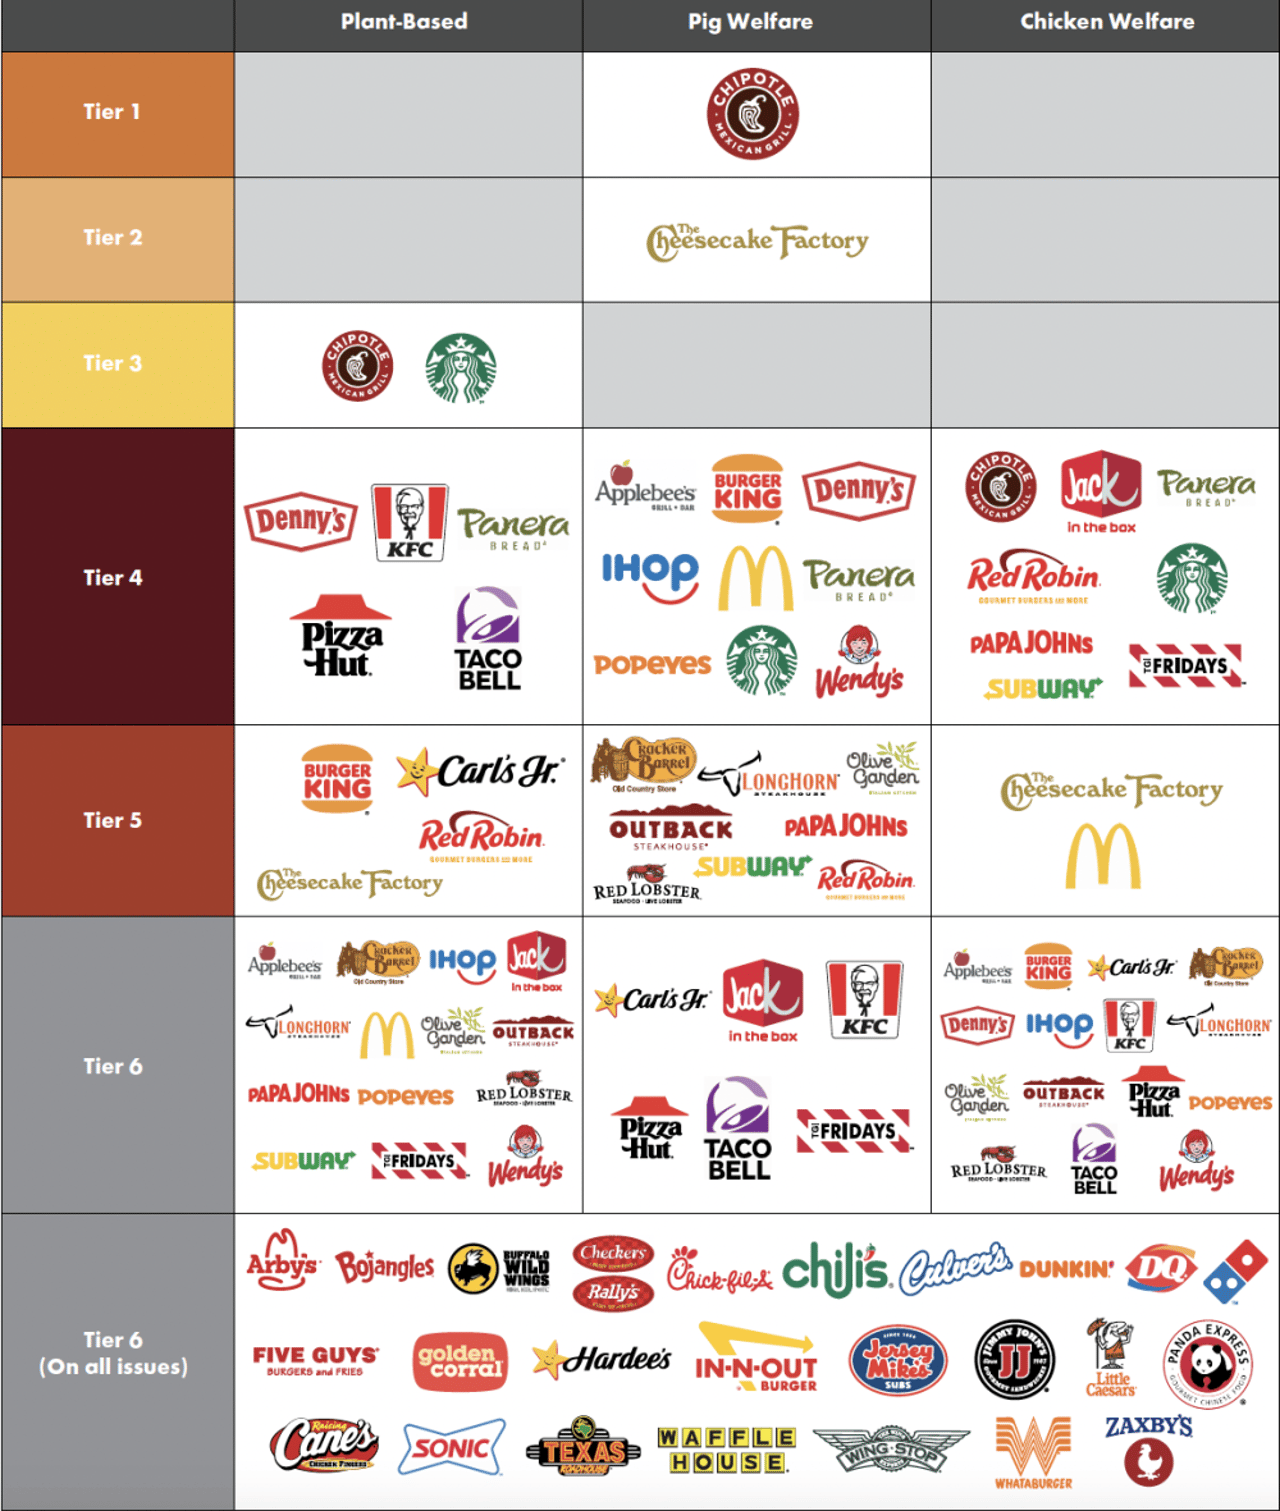 infographic showing a ranking of US restaurant chains